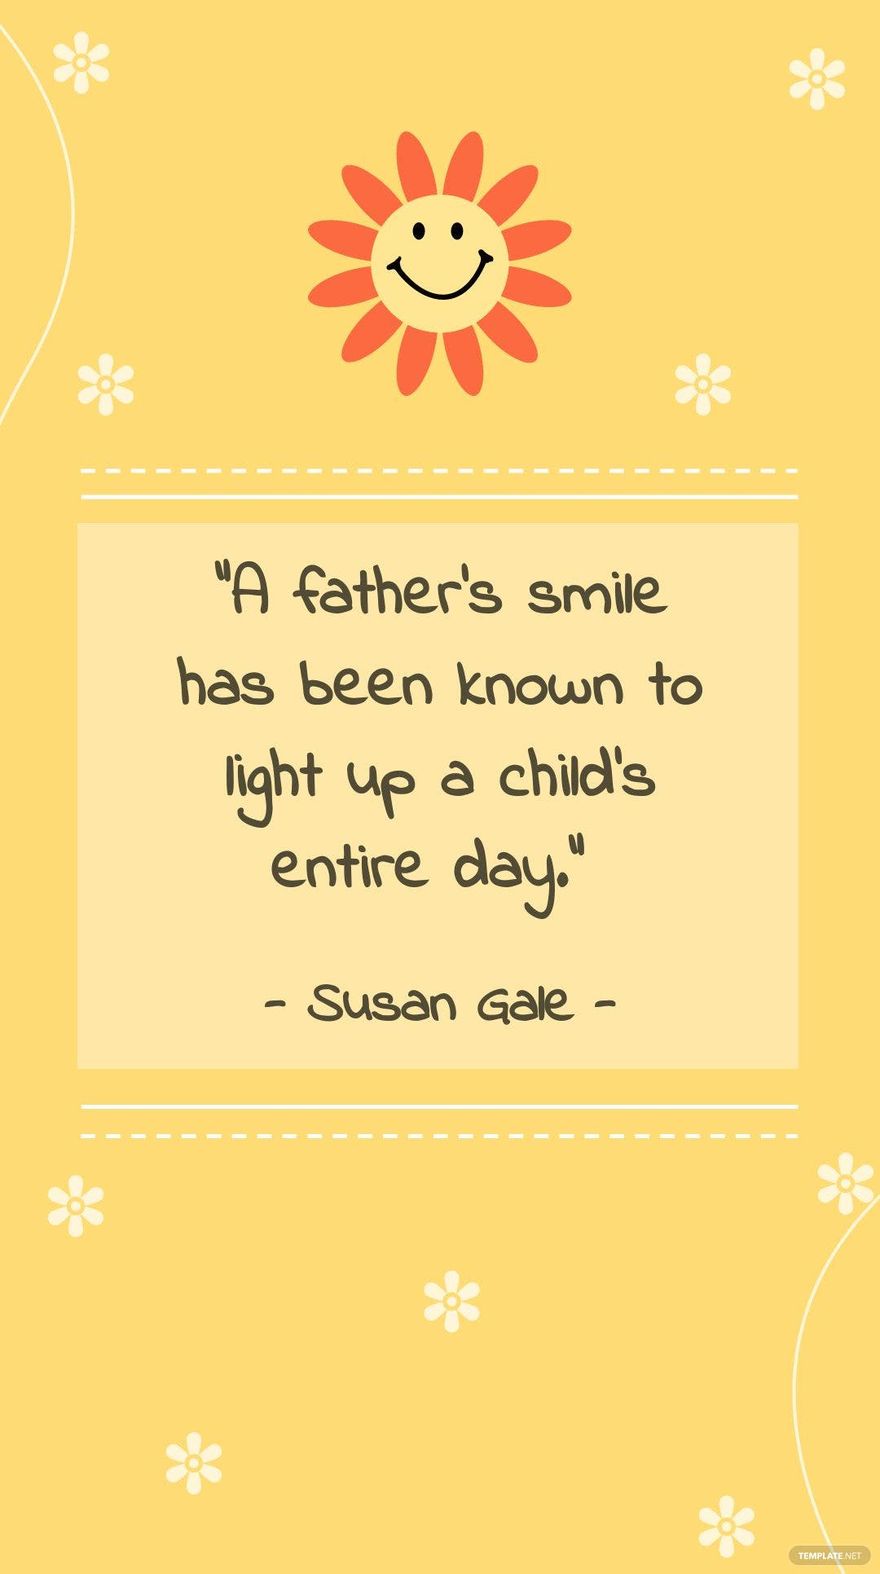 Free Susan Gale - “A father’s smile has been known to light up a child’s entire day.”  in JPG